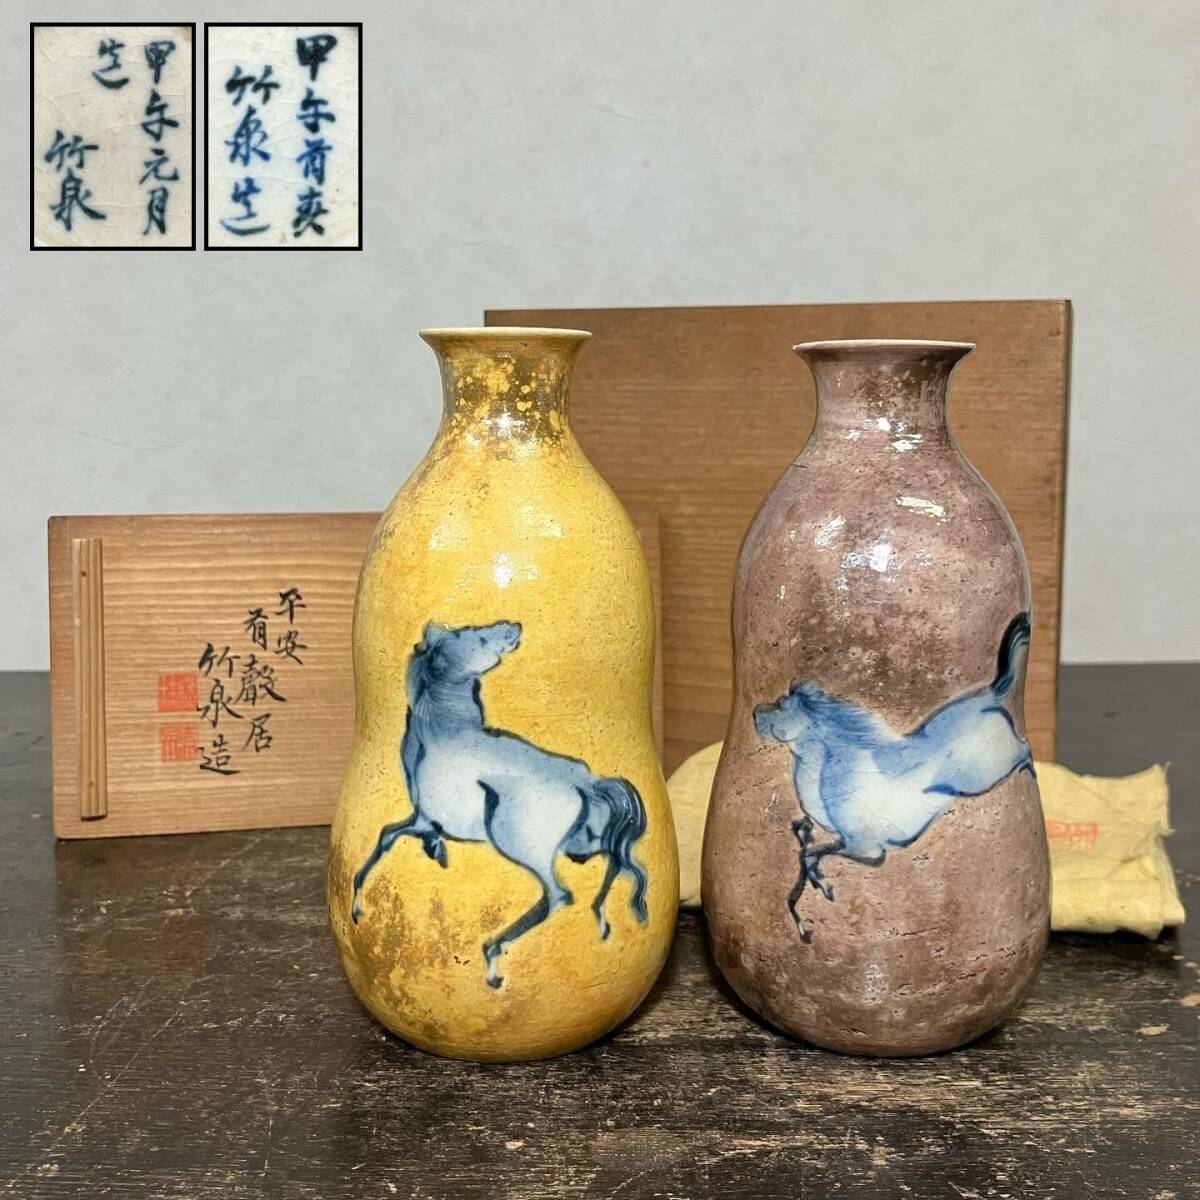  Kyoto ⑥ two fee three . bamboo Izumi structure . shape horse . sake bottle one against also box also cloth have .. sake cup and bottle cxp